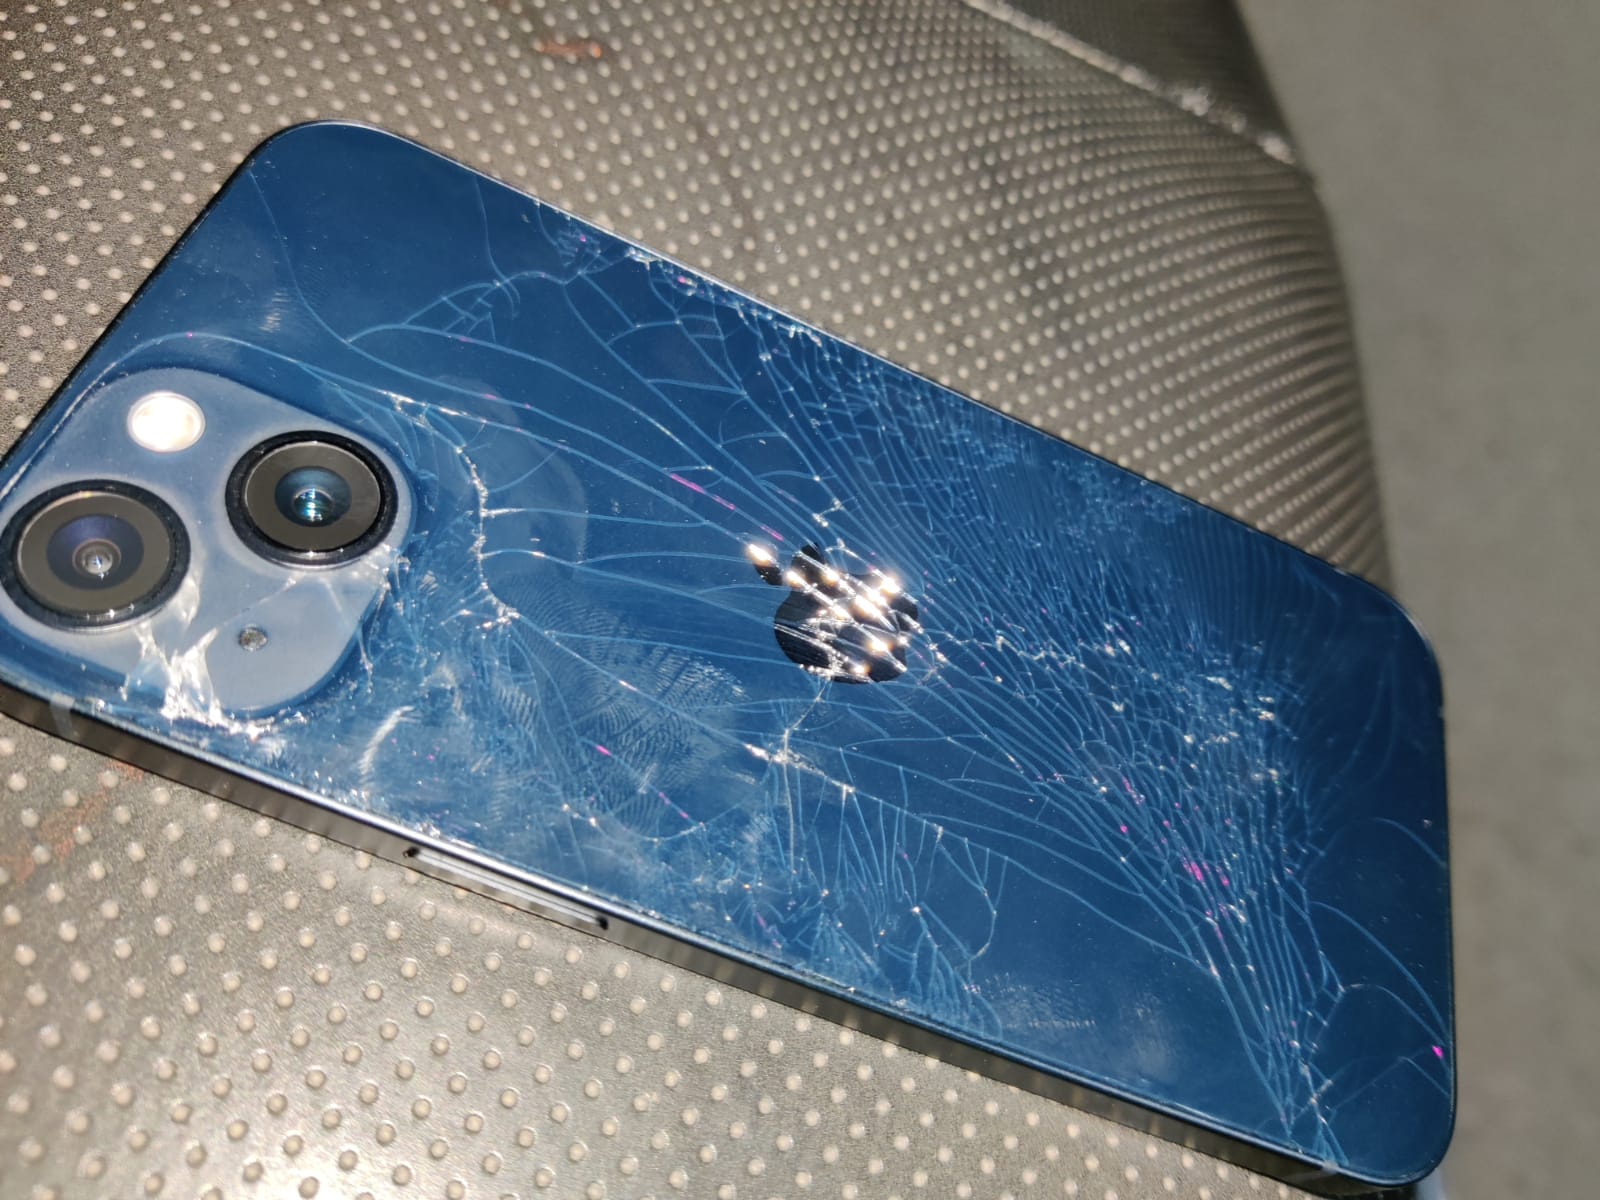 How Do I Find The Best IPhone Back Glass Repair Near Me?